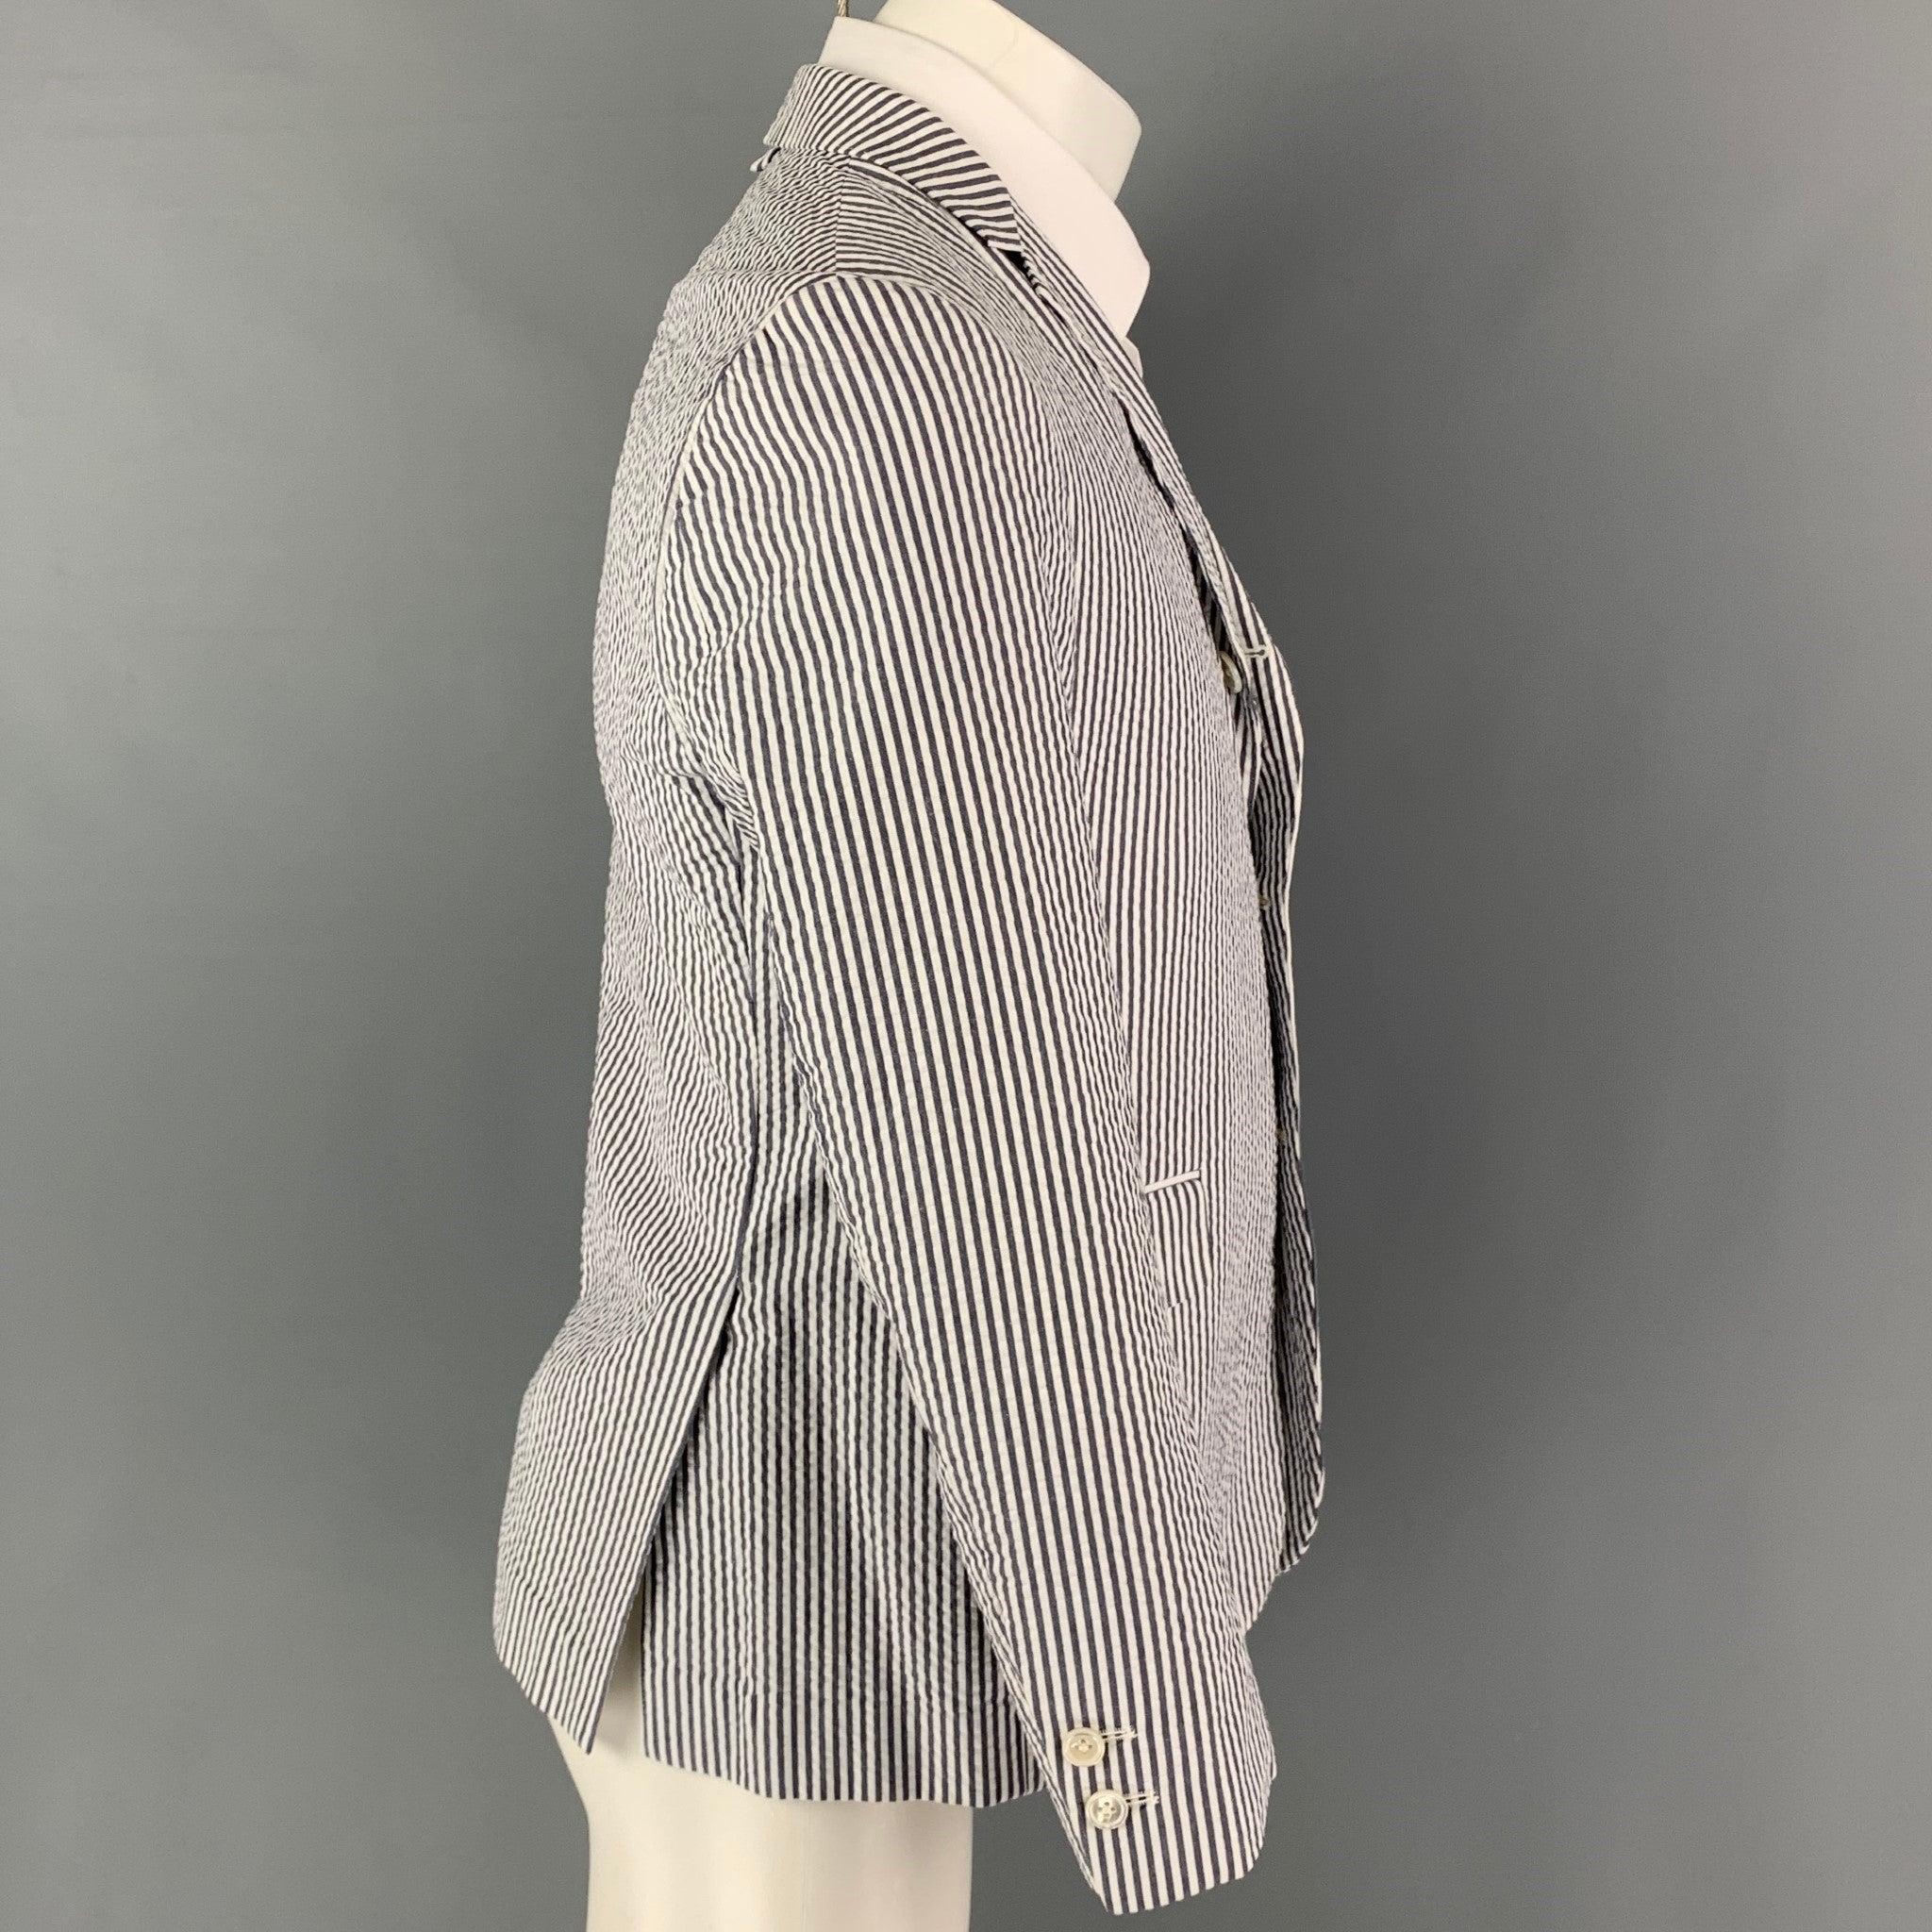 BLACK FLEECE sport coat comes in a white & grey seersucker cotton featuring a notch lapel, flap pockets, double back vent, and a three button closure.
Very Good
Pre-Owned Condition.  

Marked:   BB1 

Measurements: 
  
Shoulder: 17 inches Chest:
38